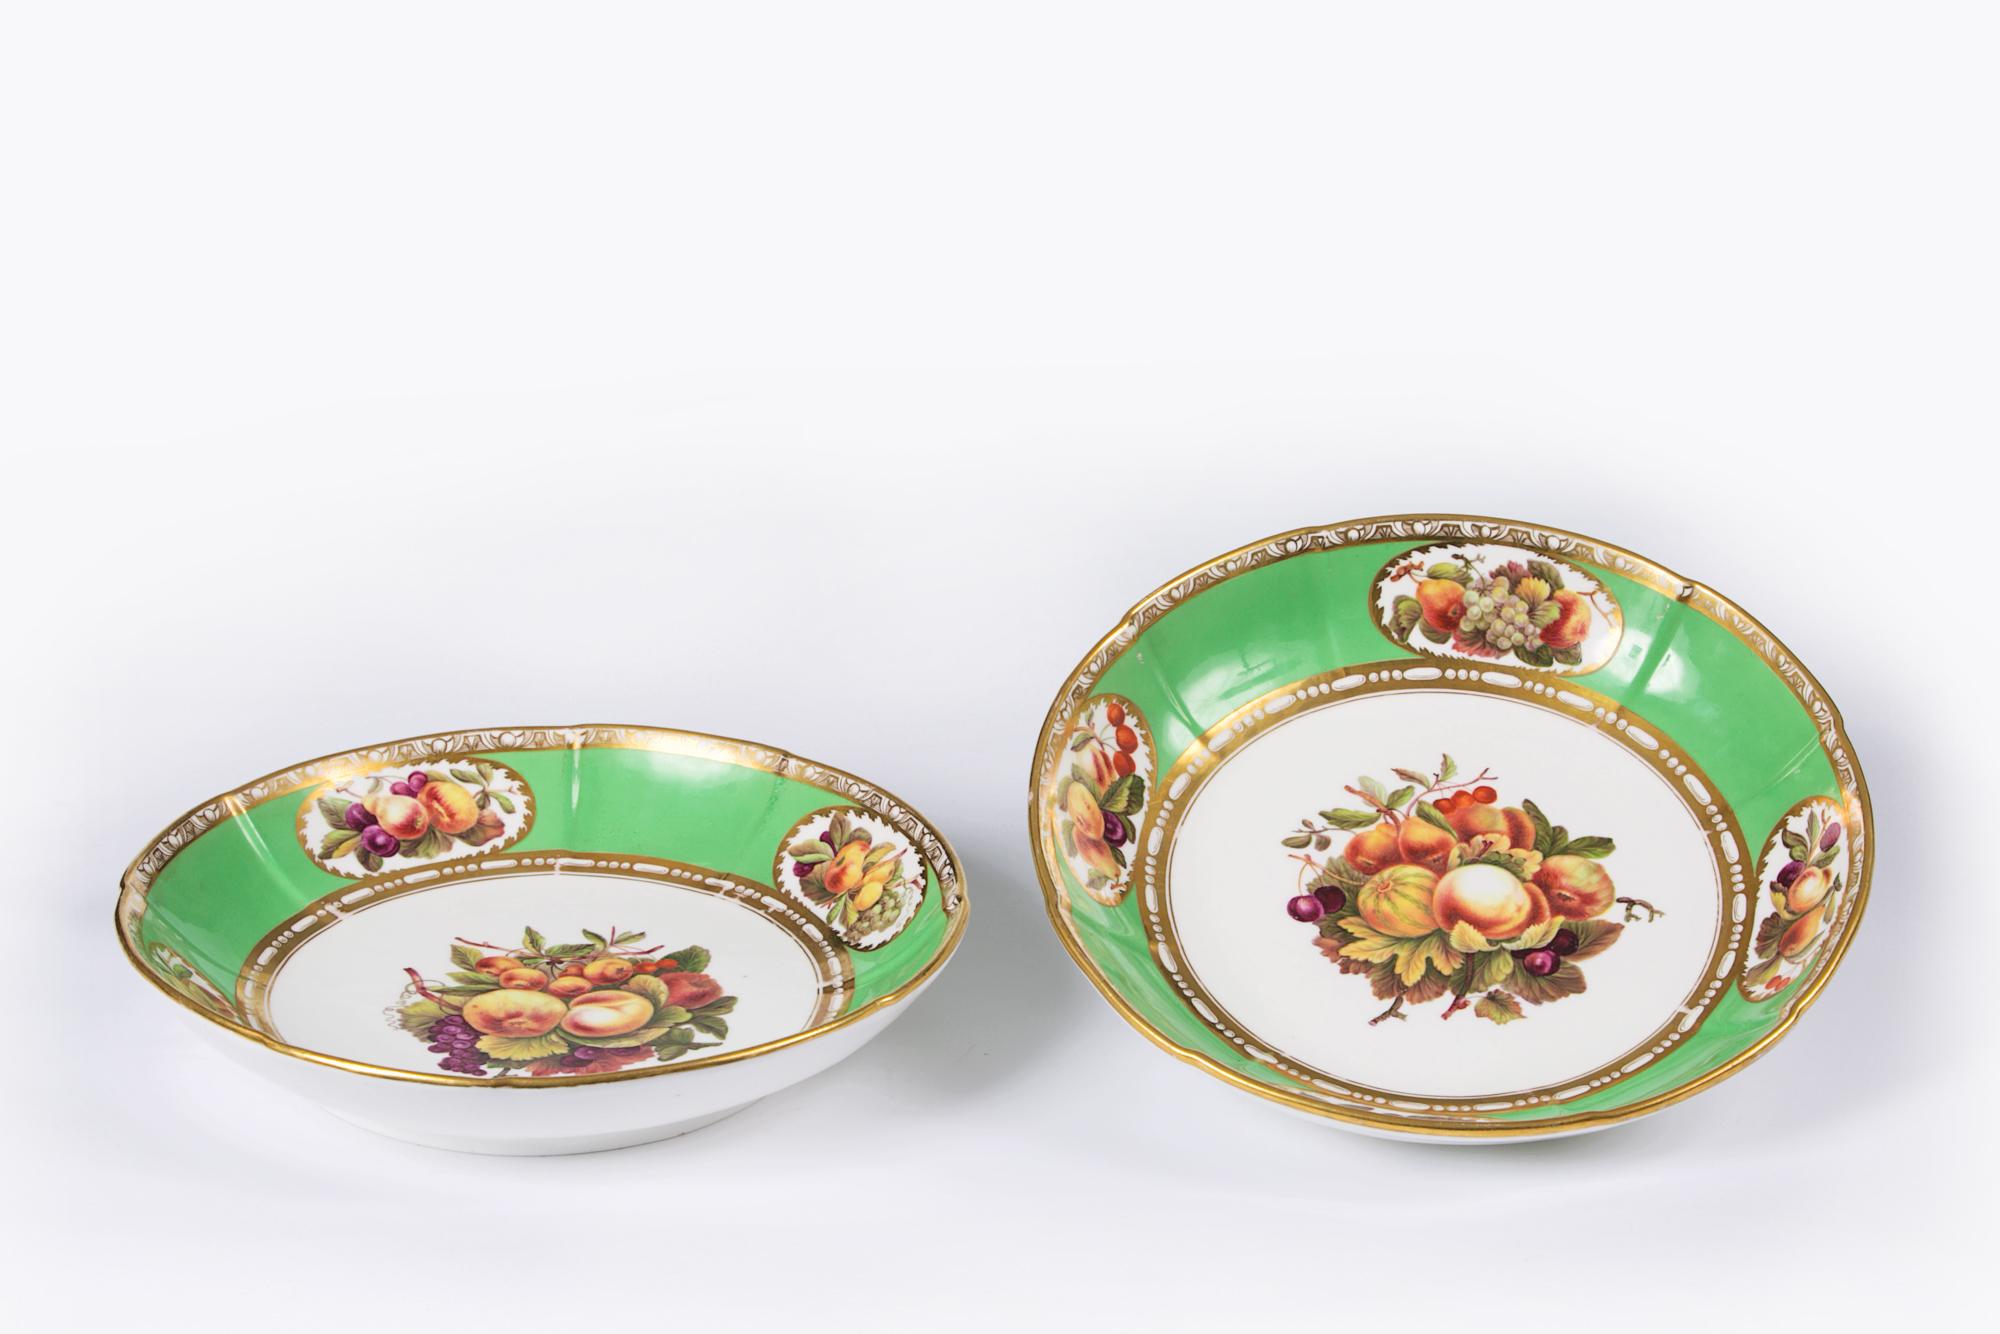 British Early 19th Century Regency Spode Pair of Porcelain Dessert Dishes For Sale